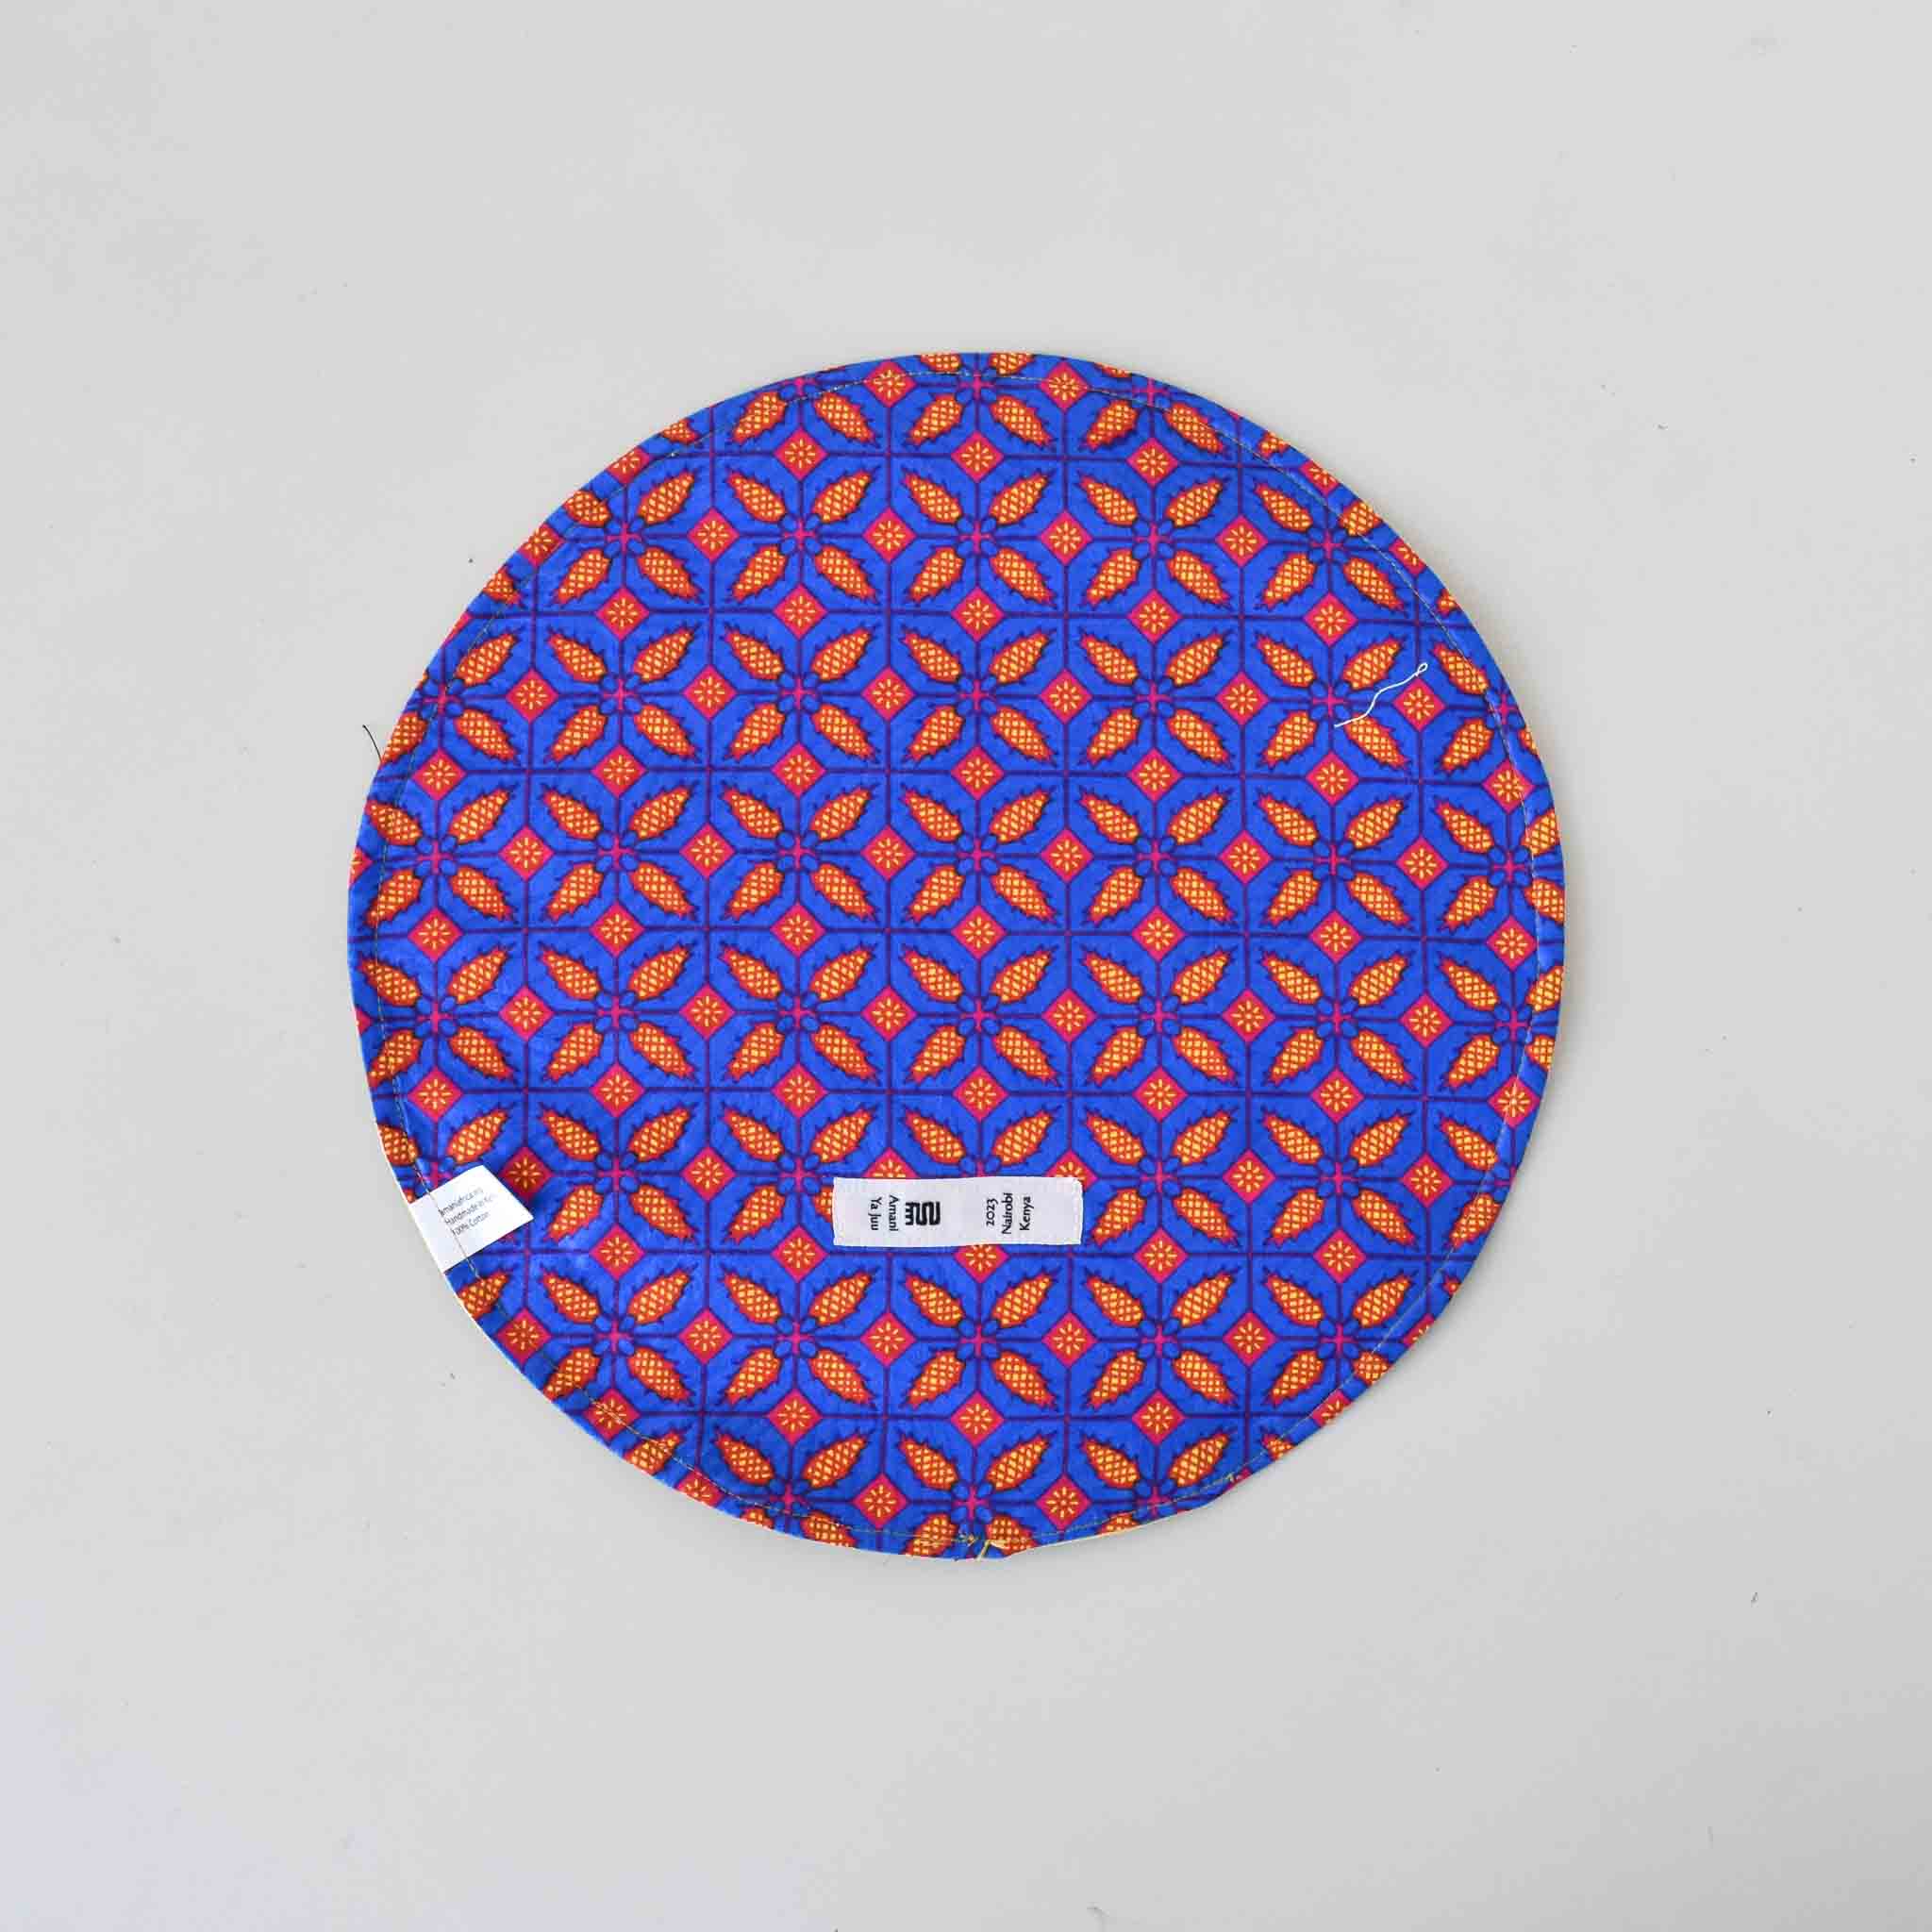 Lion Placemat-handmade by the women of Amani in Kenya for a Fair Trade boutique